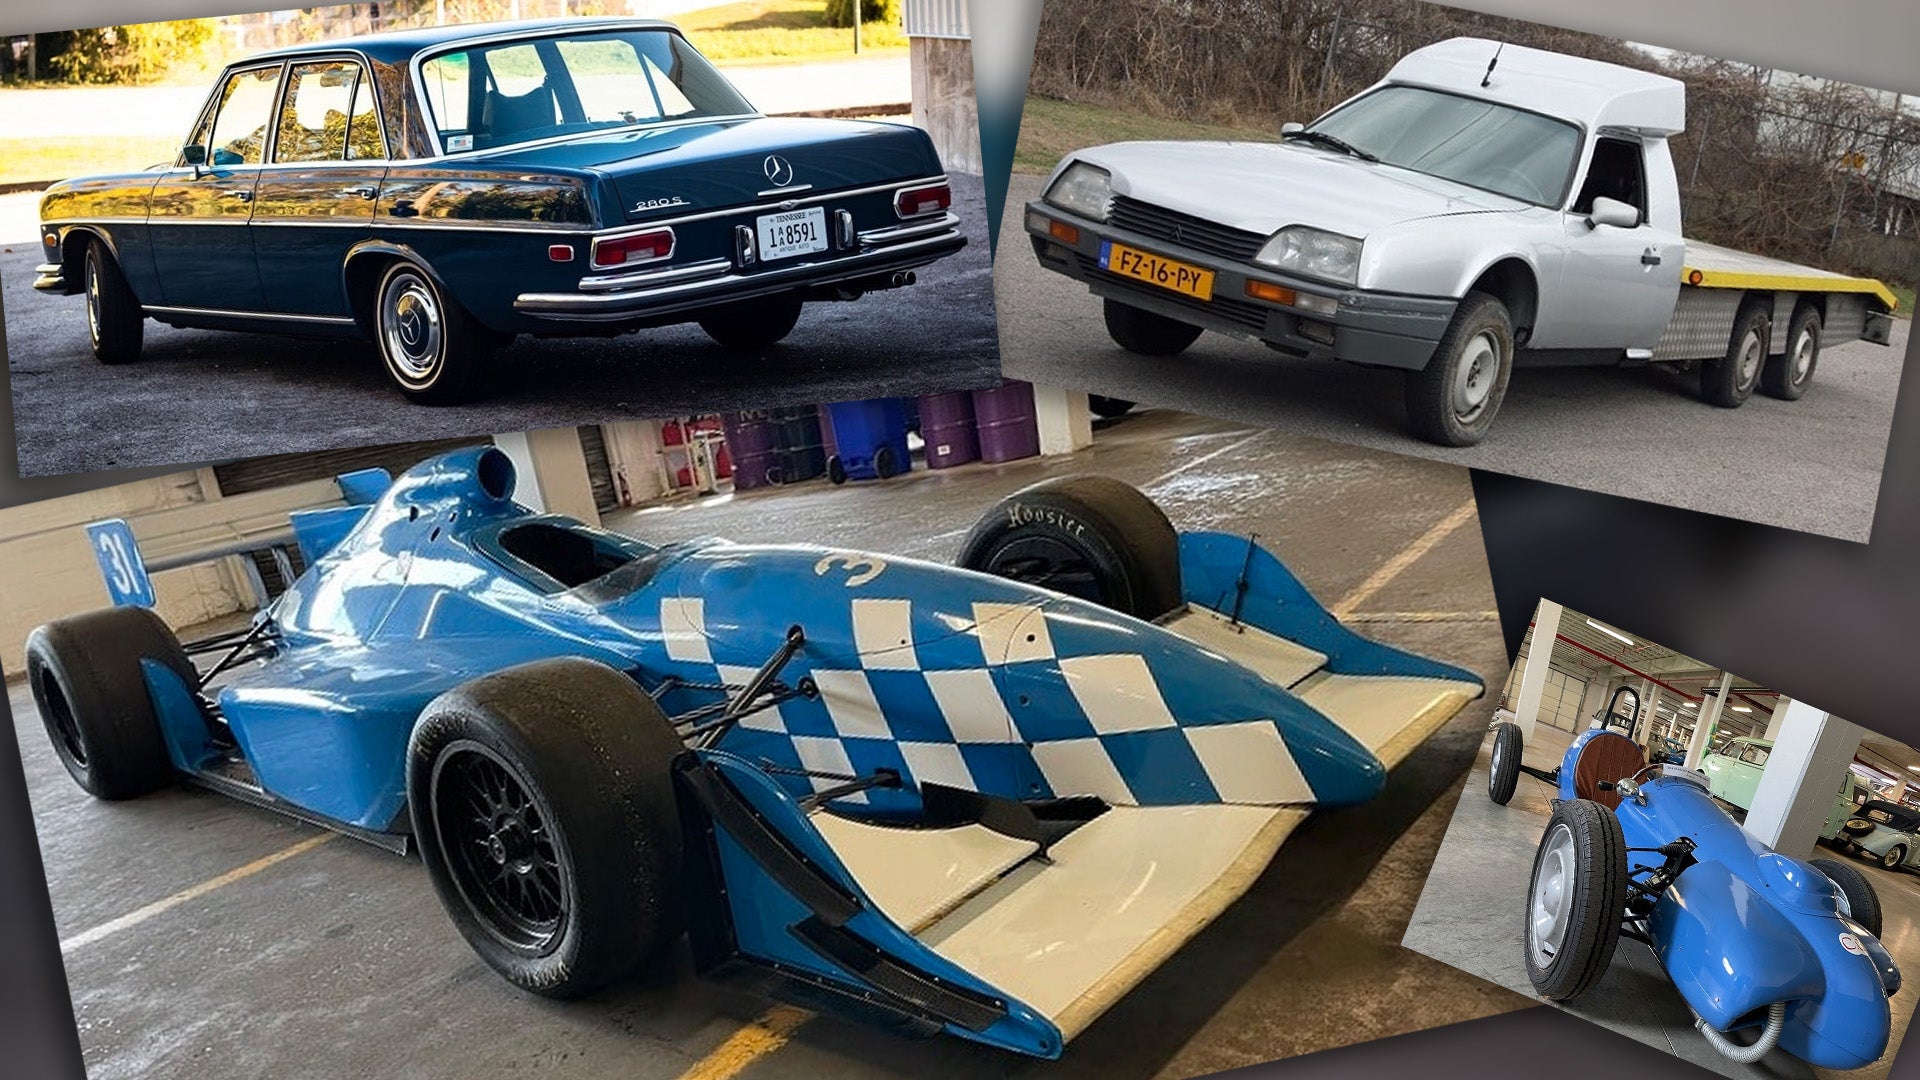 The renowned Weird Lane Motor Museum is offering 10 luxurious cars for sale.